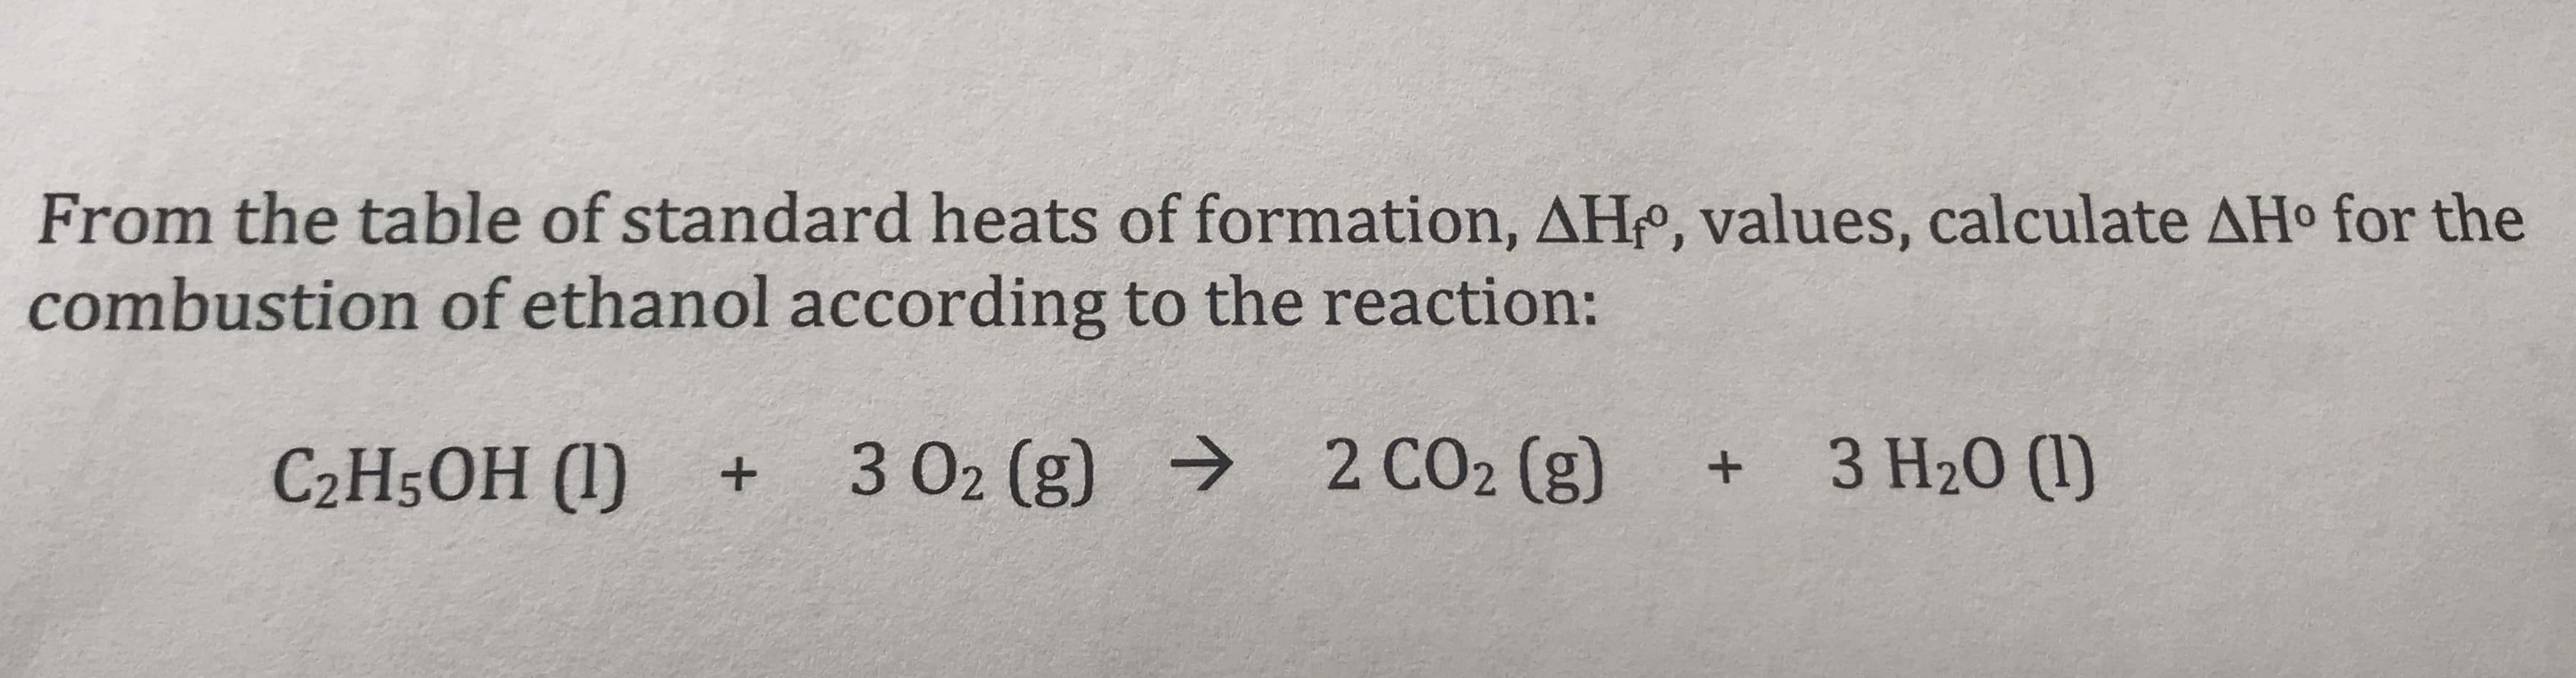 From the table of standard heats of formation, AHo, values, calculate AHo for the
combustion of ethanol according to the reaction:
2 CO2 (g)
3 H20 (I)
3 O2 (g)
C2H50H (I)
+
+
